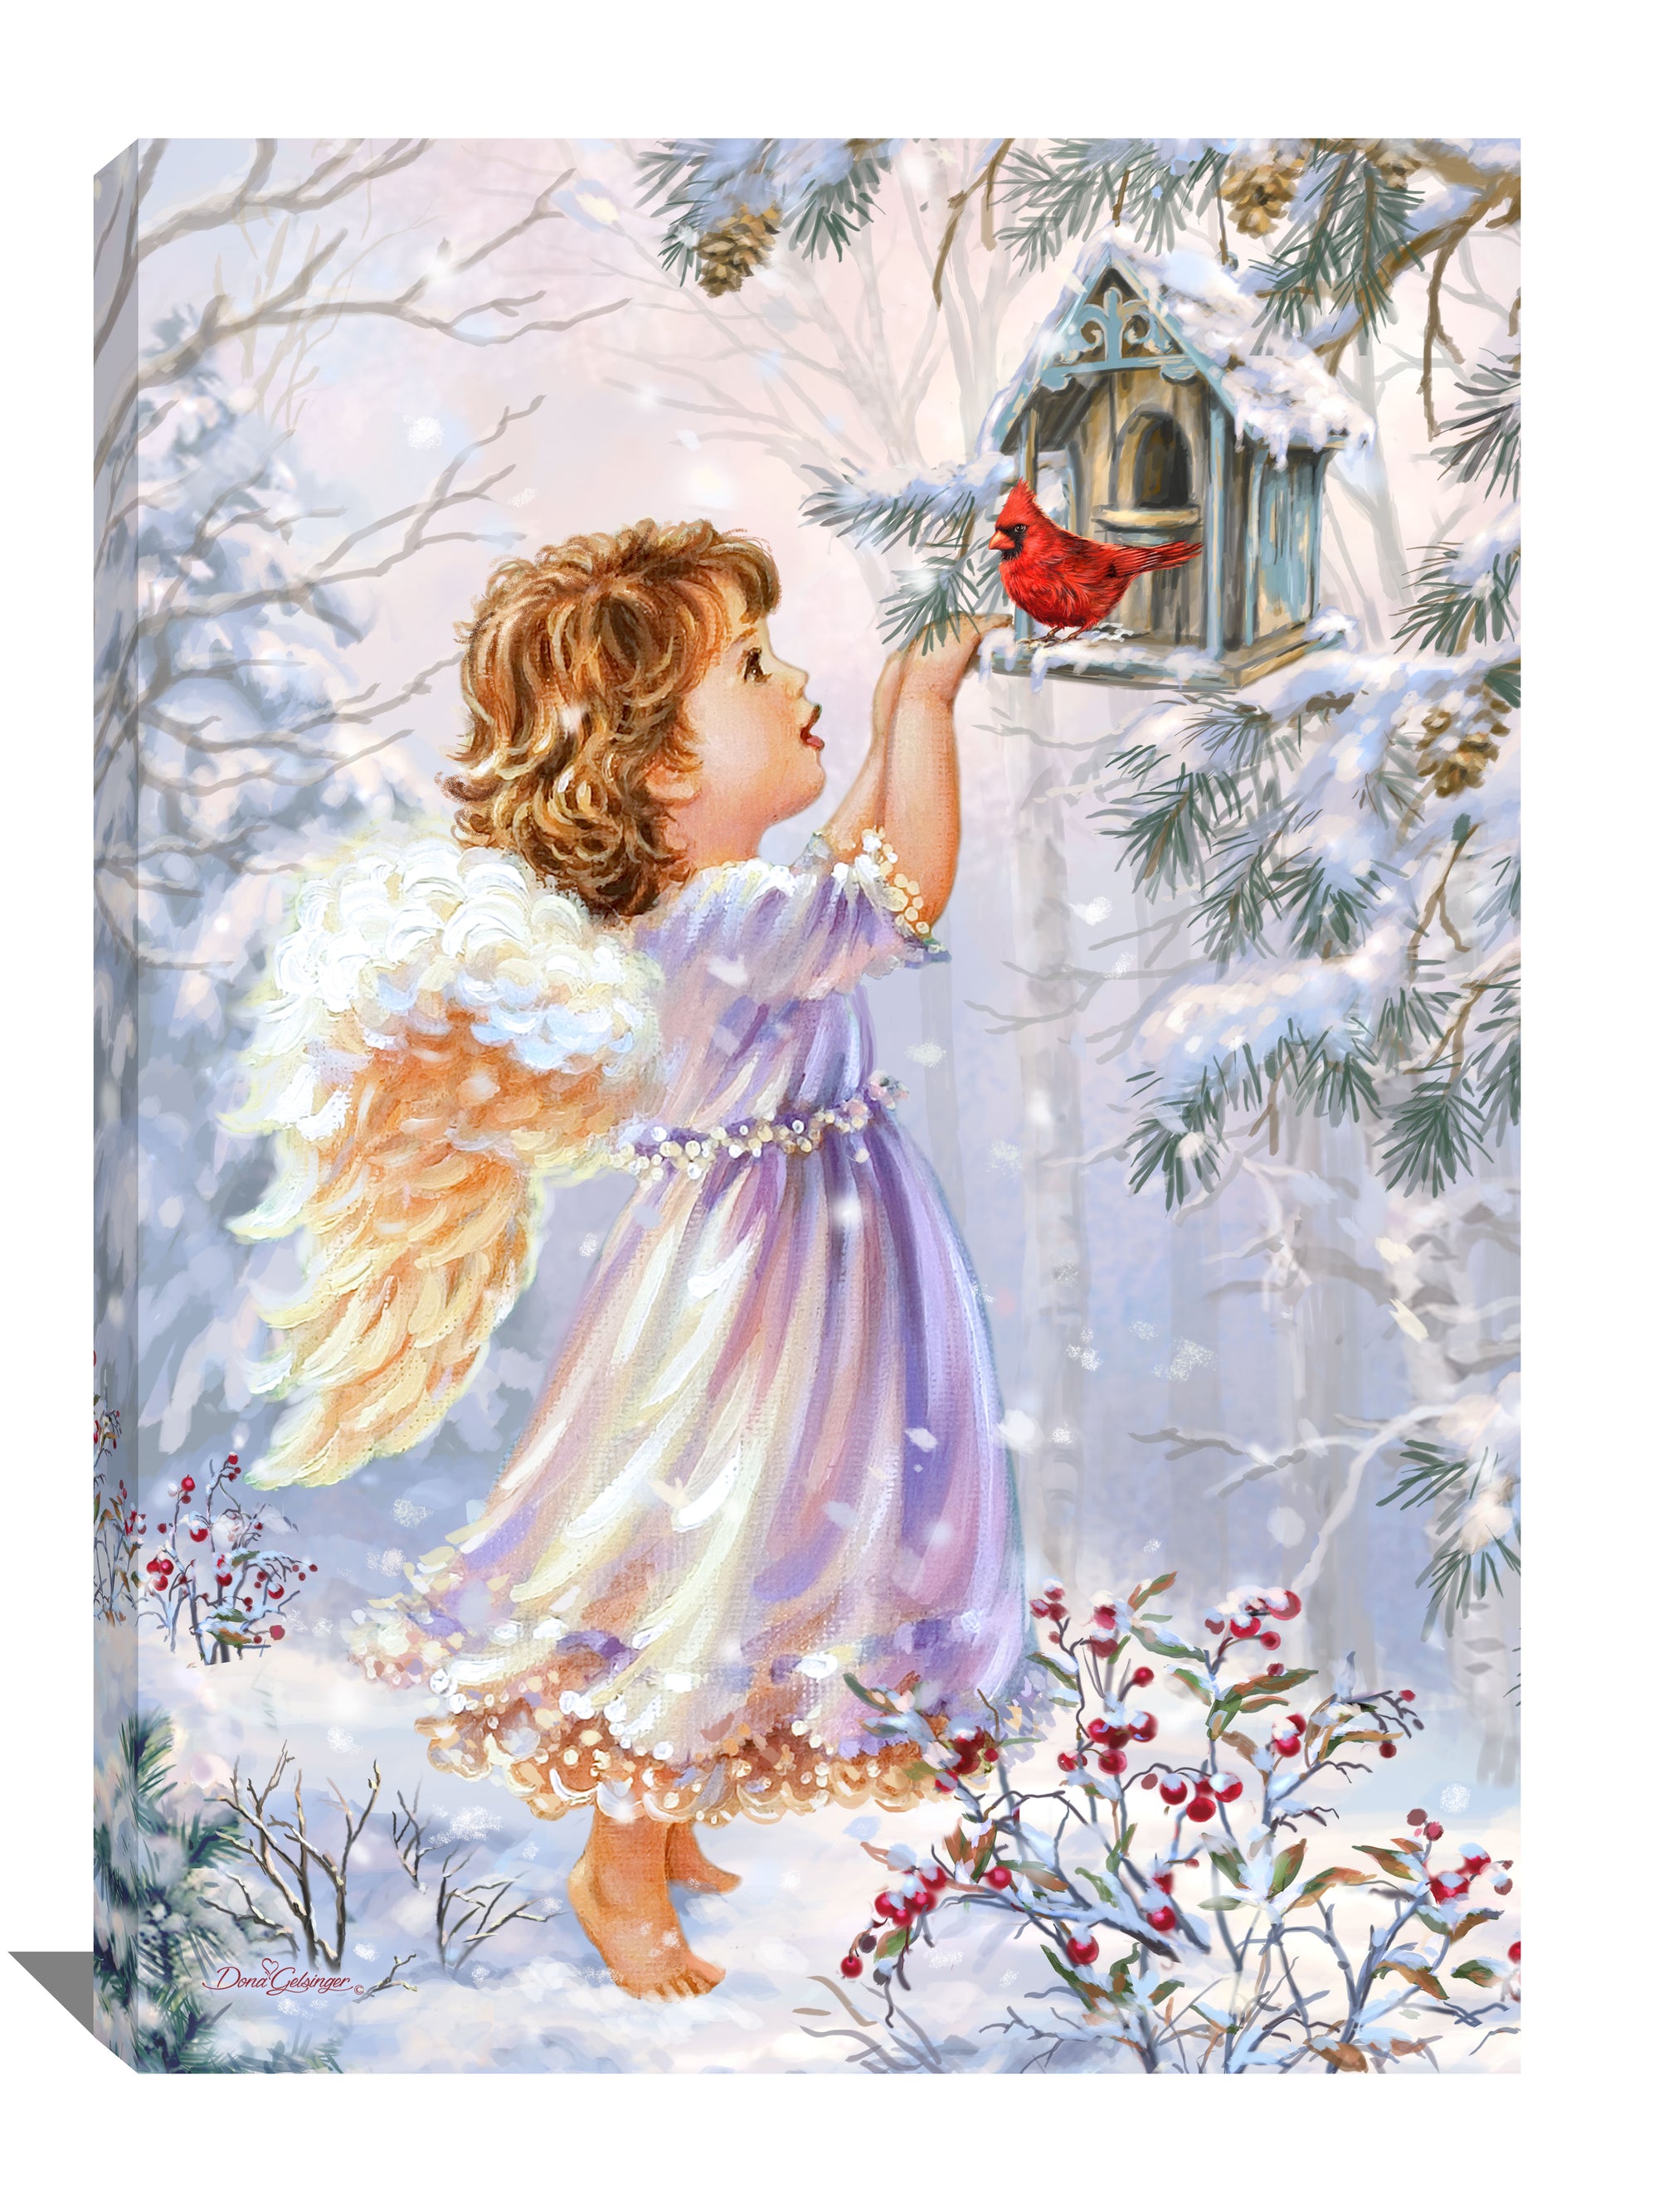 a young angel with delicate white wings standing on her tiptoes, gazing in awe at a charming birdhouse adorned with a stunning cardinal perched on it. The serene winter wonderland scene is beautifully captured with the snow-covered forest that surrounds them.